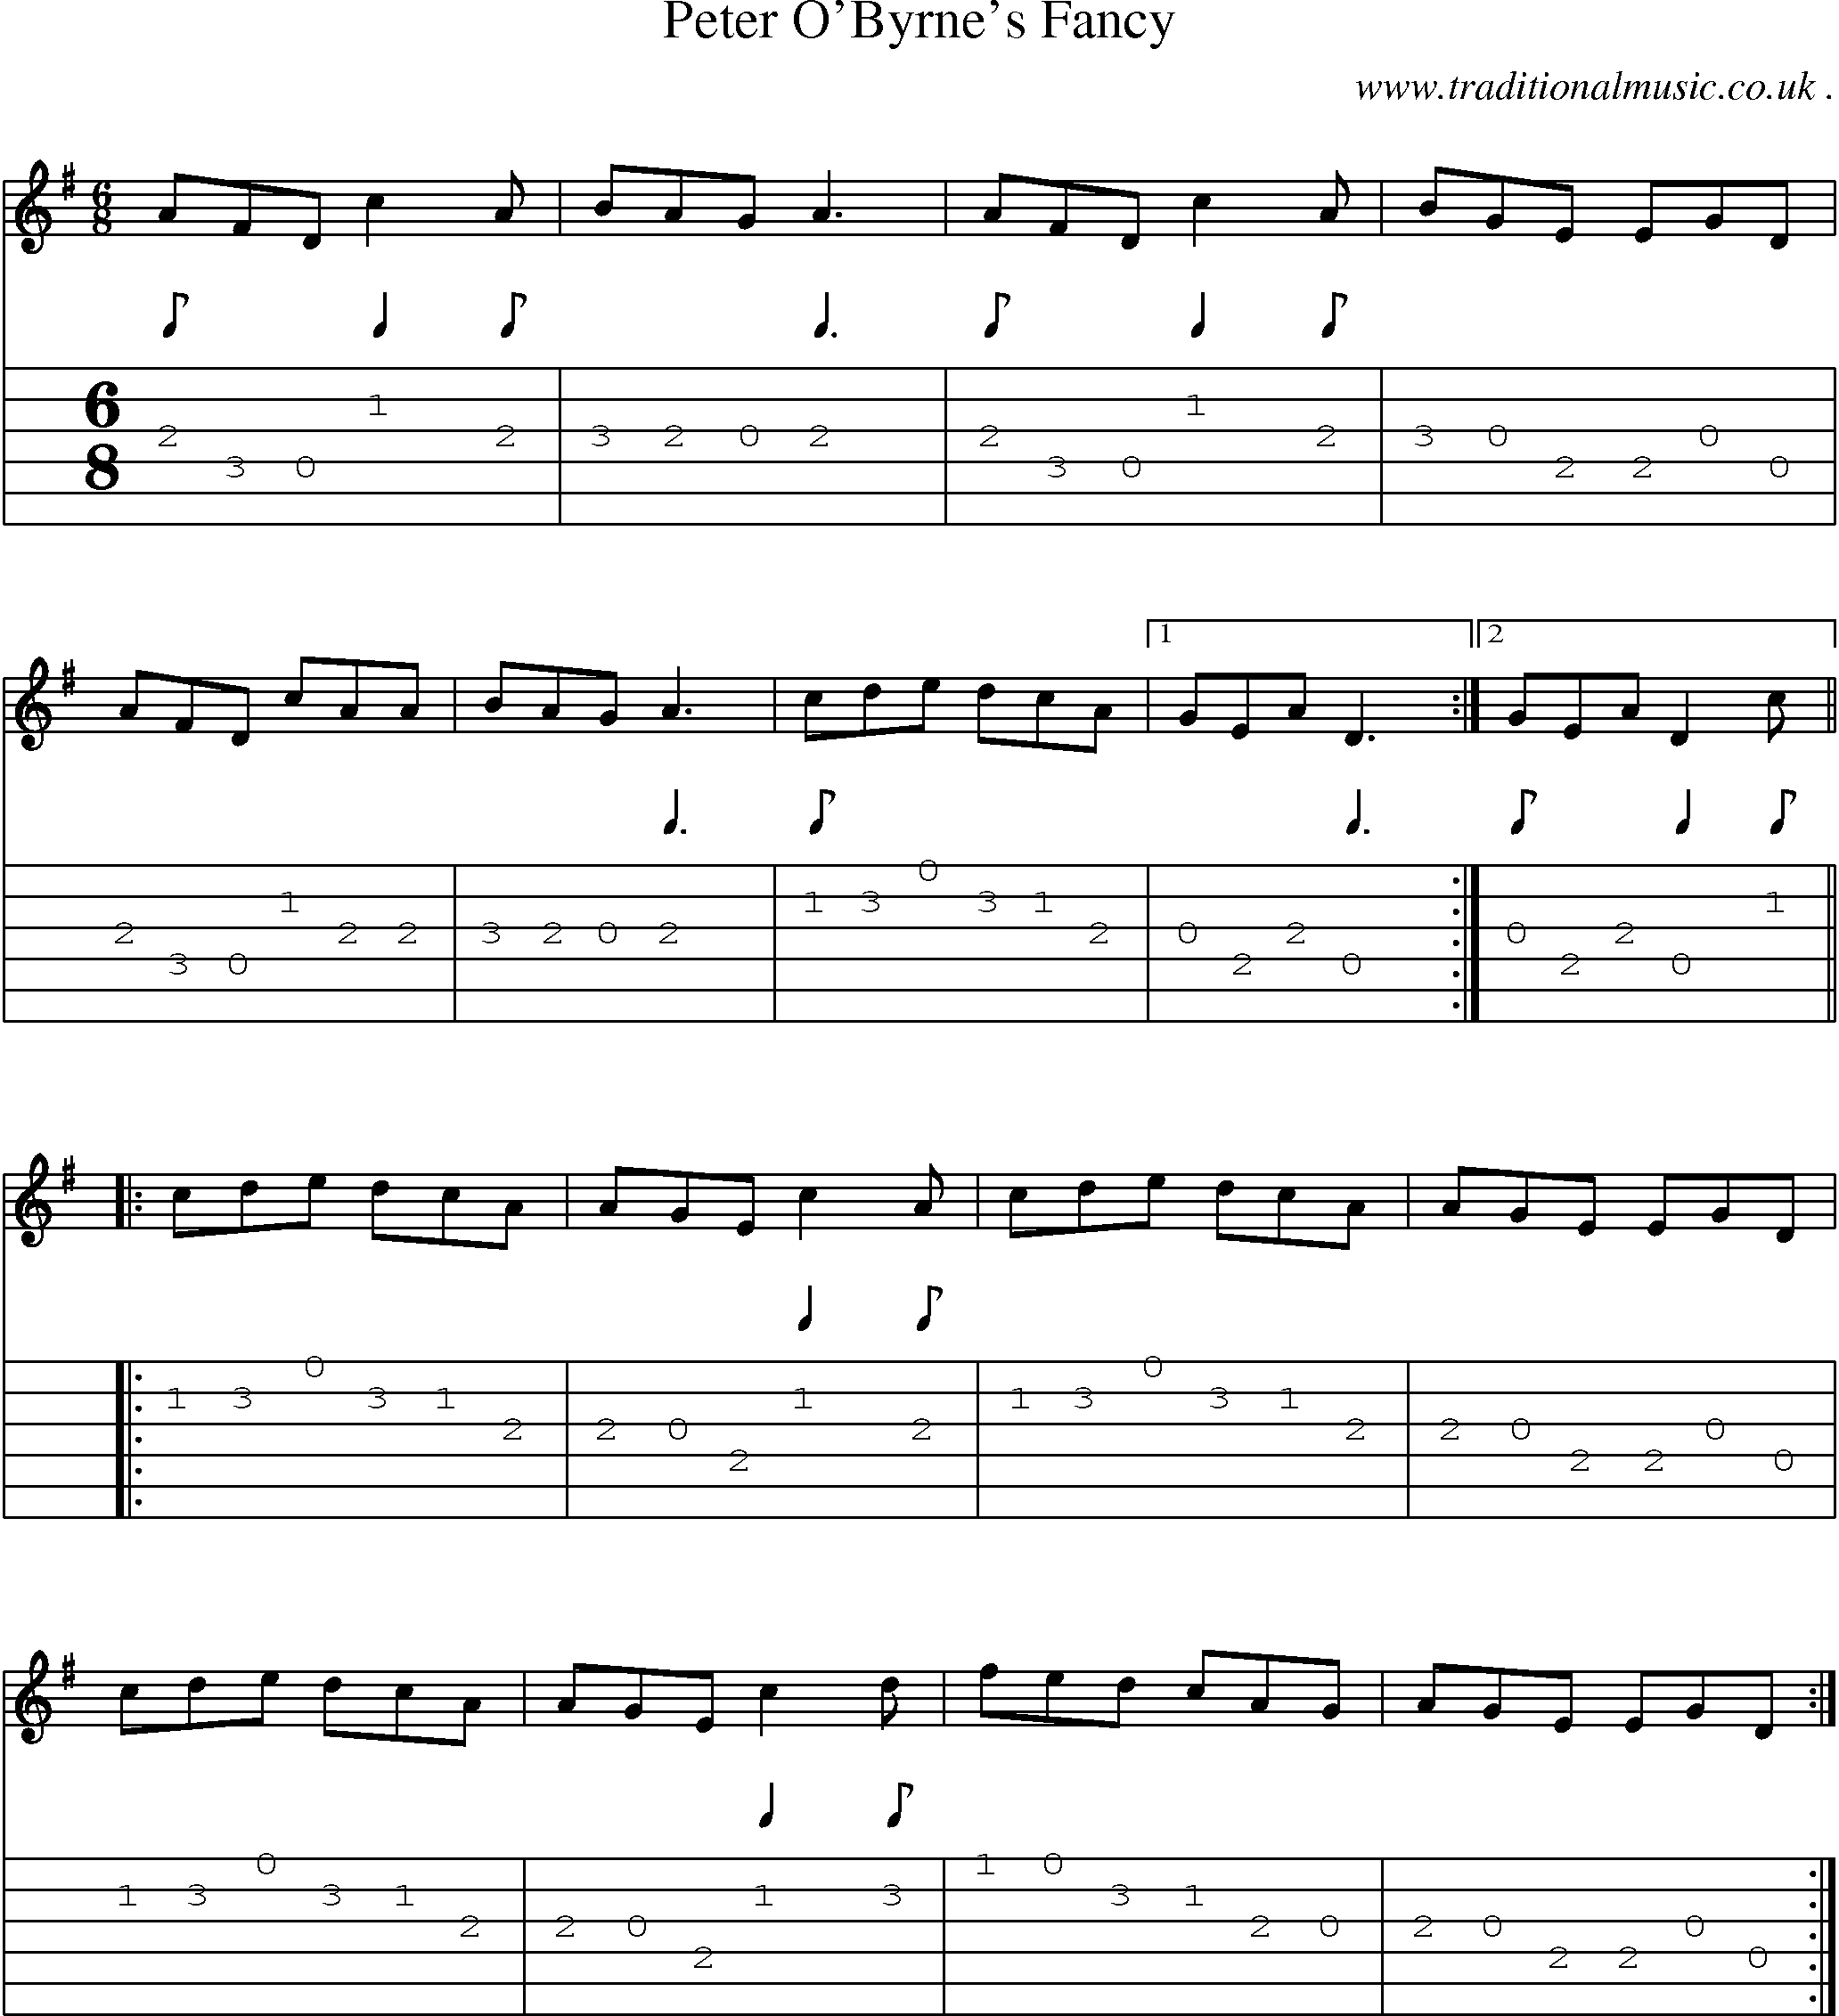 Sheet-Music and Guitar Tabs for Peter Obyrnes Fancy